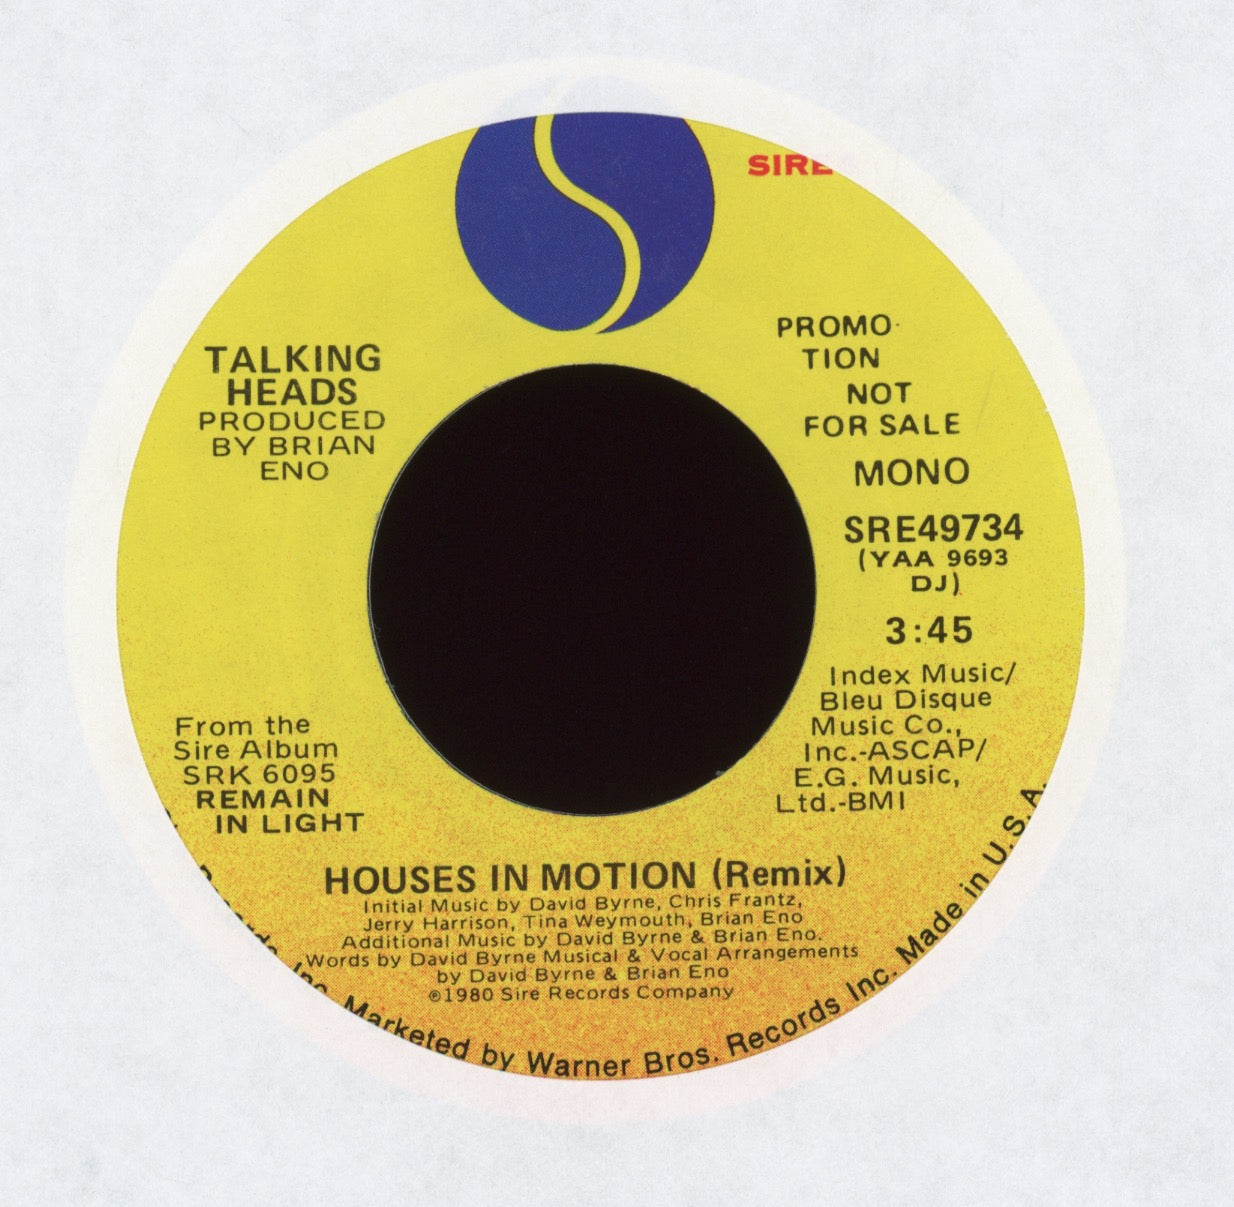 Talking Heads - Houses In Motion (Remix) on Sire Promo Rock 45